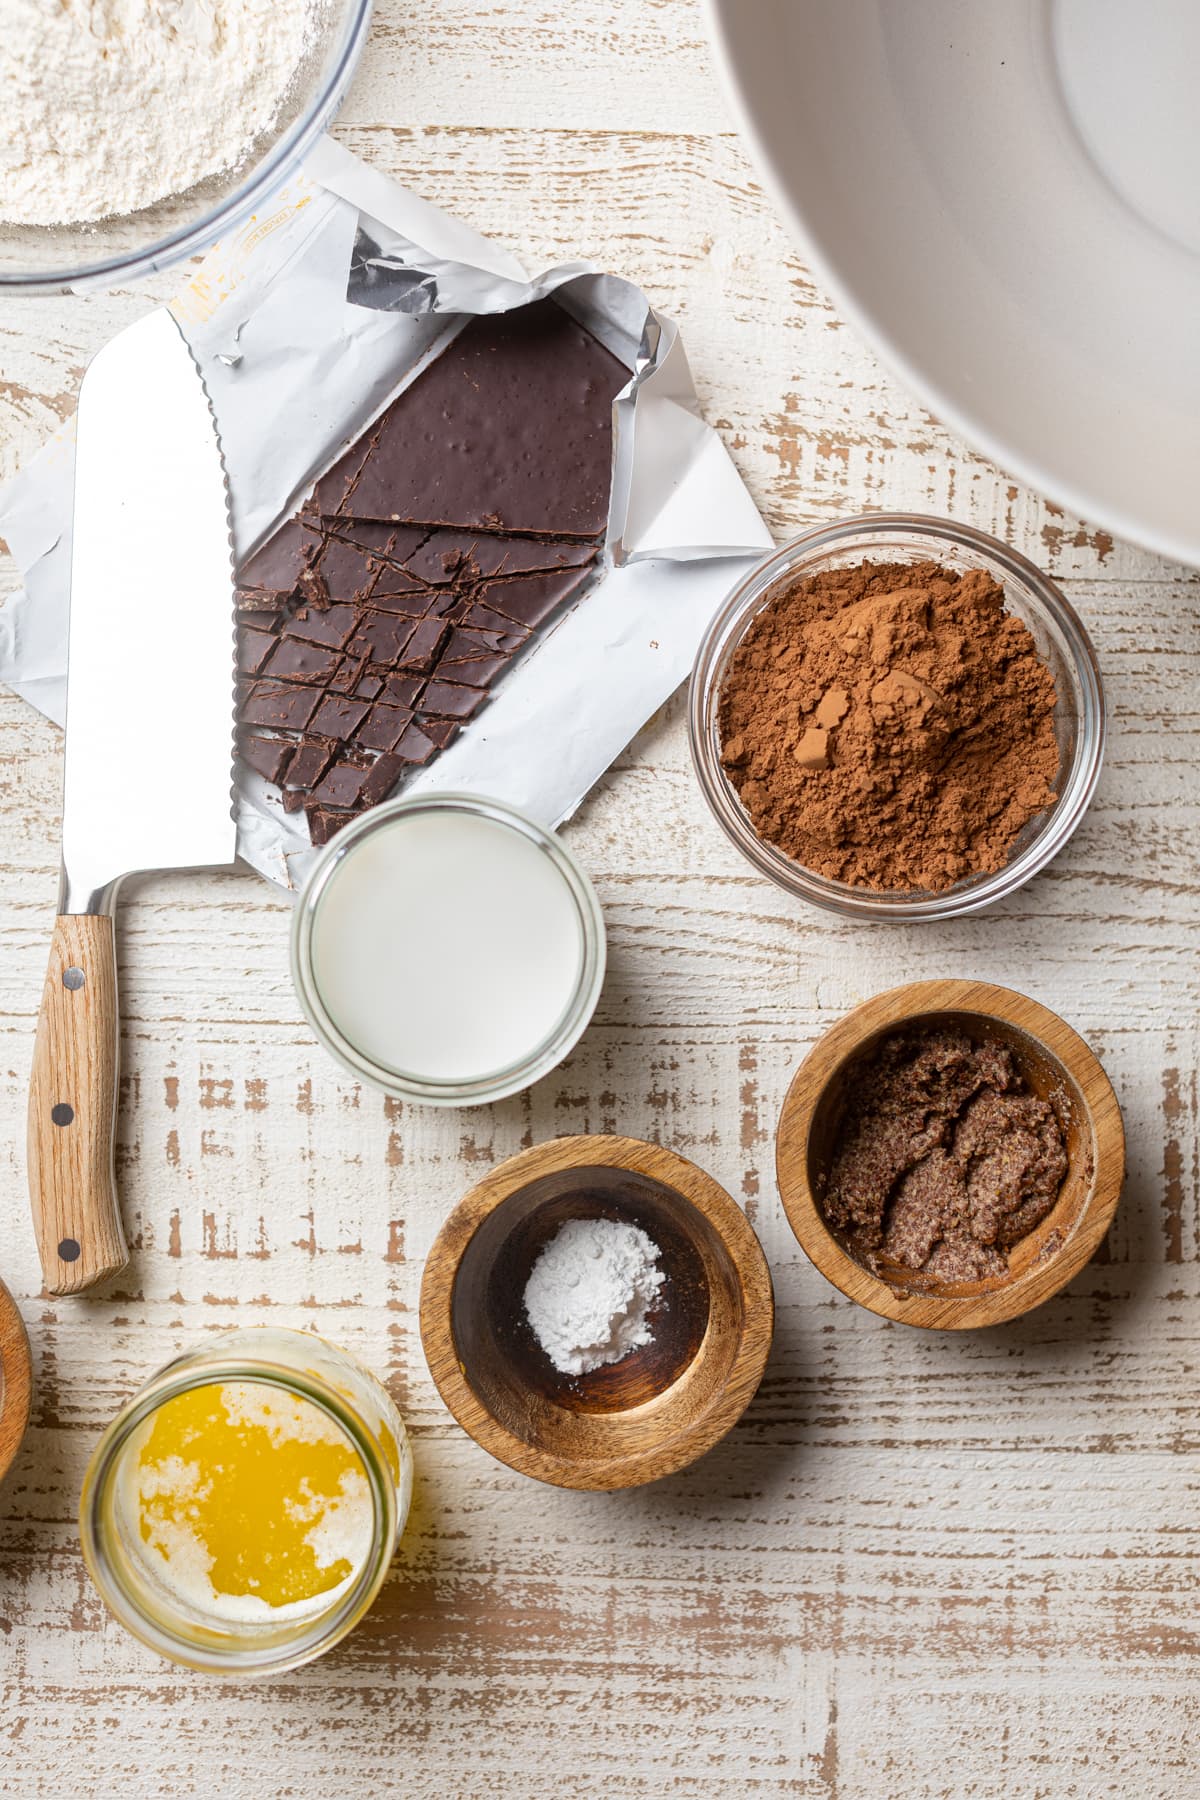 Cocoa powder, chocolate and other ingredients.